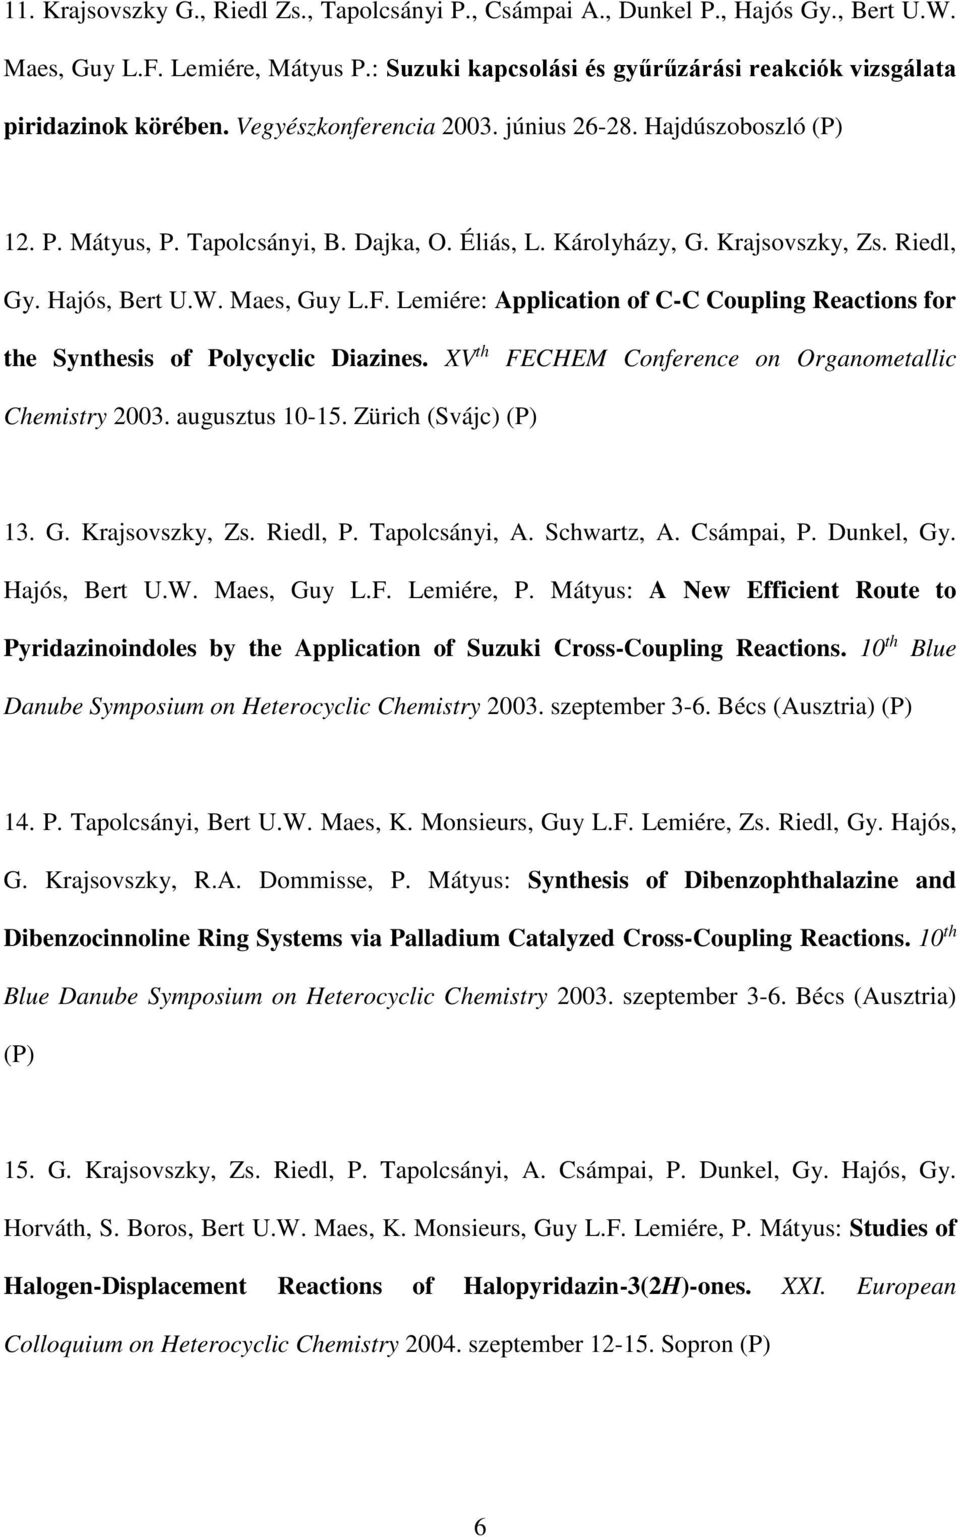 Lemiére: Application of C-C Coupling Reactions for the Synthesis of Polycyclic Diazines. XV th FECHEM Conference on Organometallic Chemistry 2003. augusztus 10-15. Zürich (Svájc) (P) 13. G.